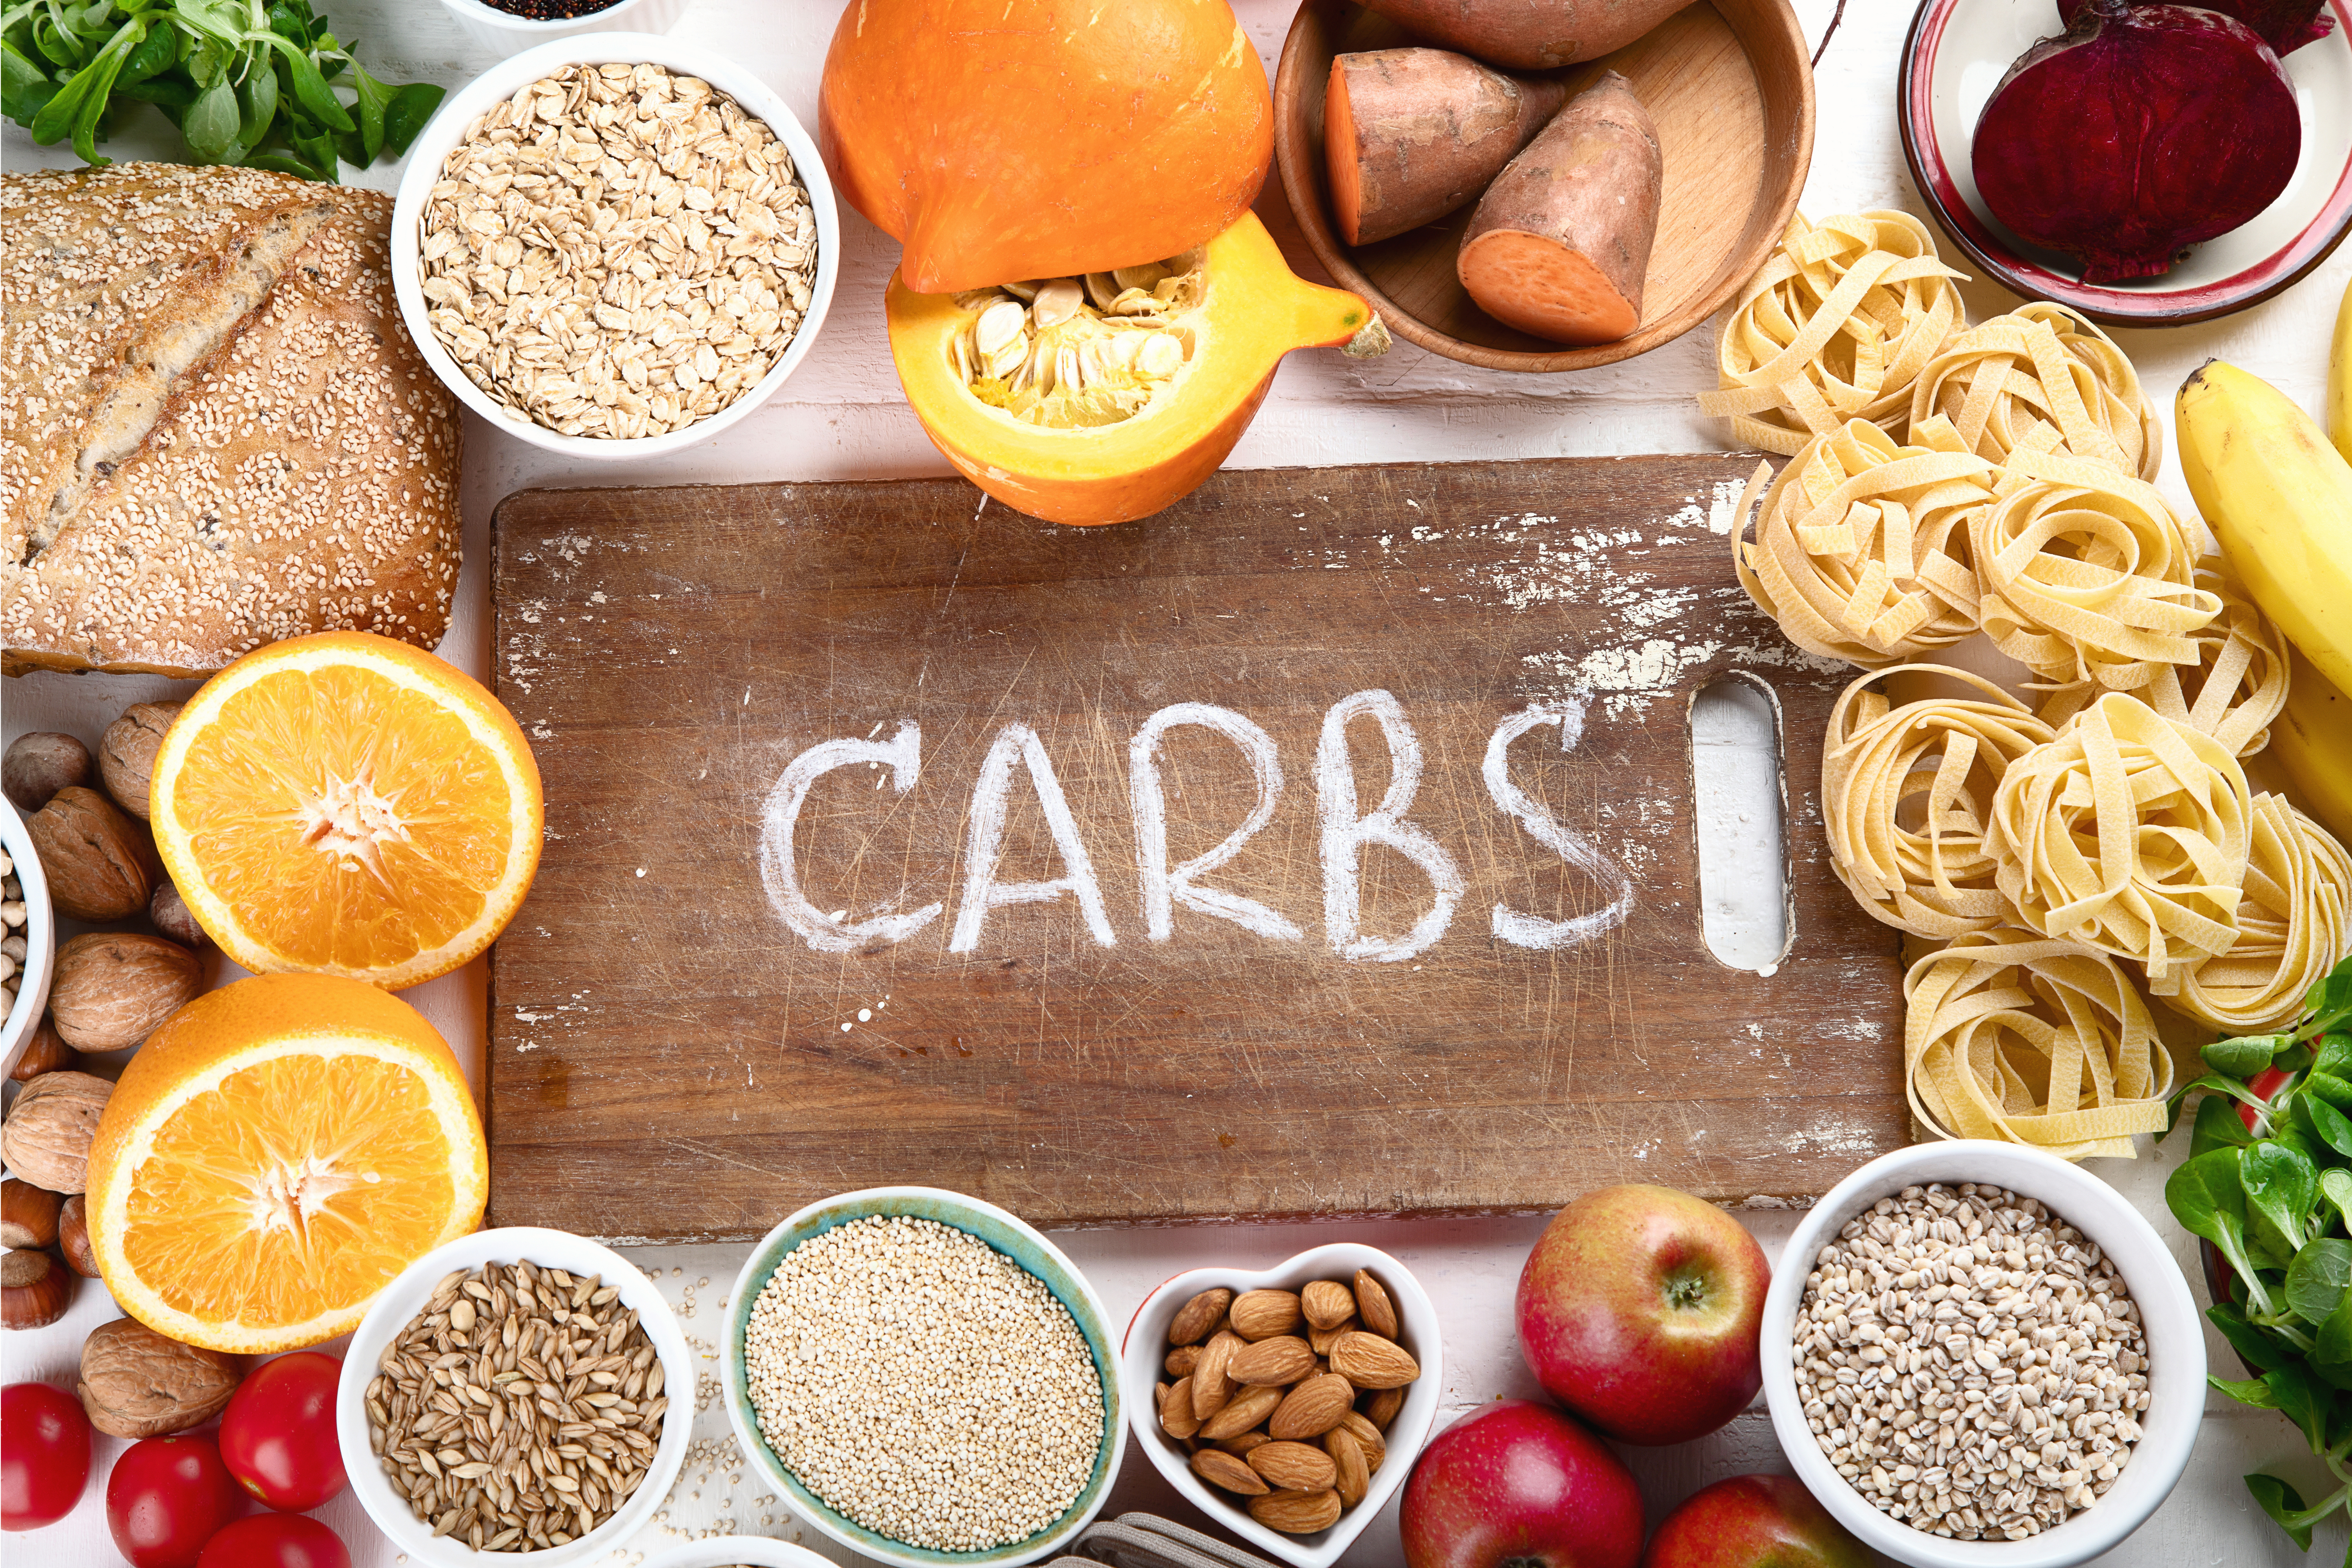 Overhead image of various types of carbohydrates including bread, pasta, and fruit